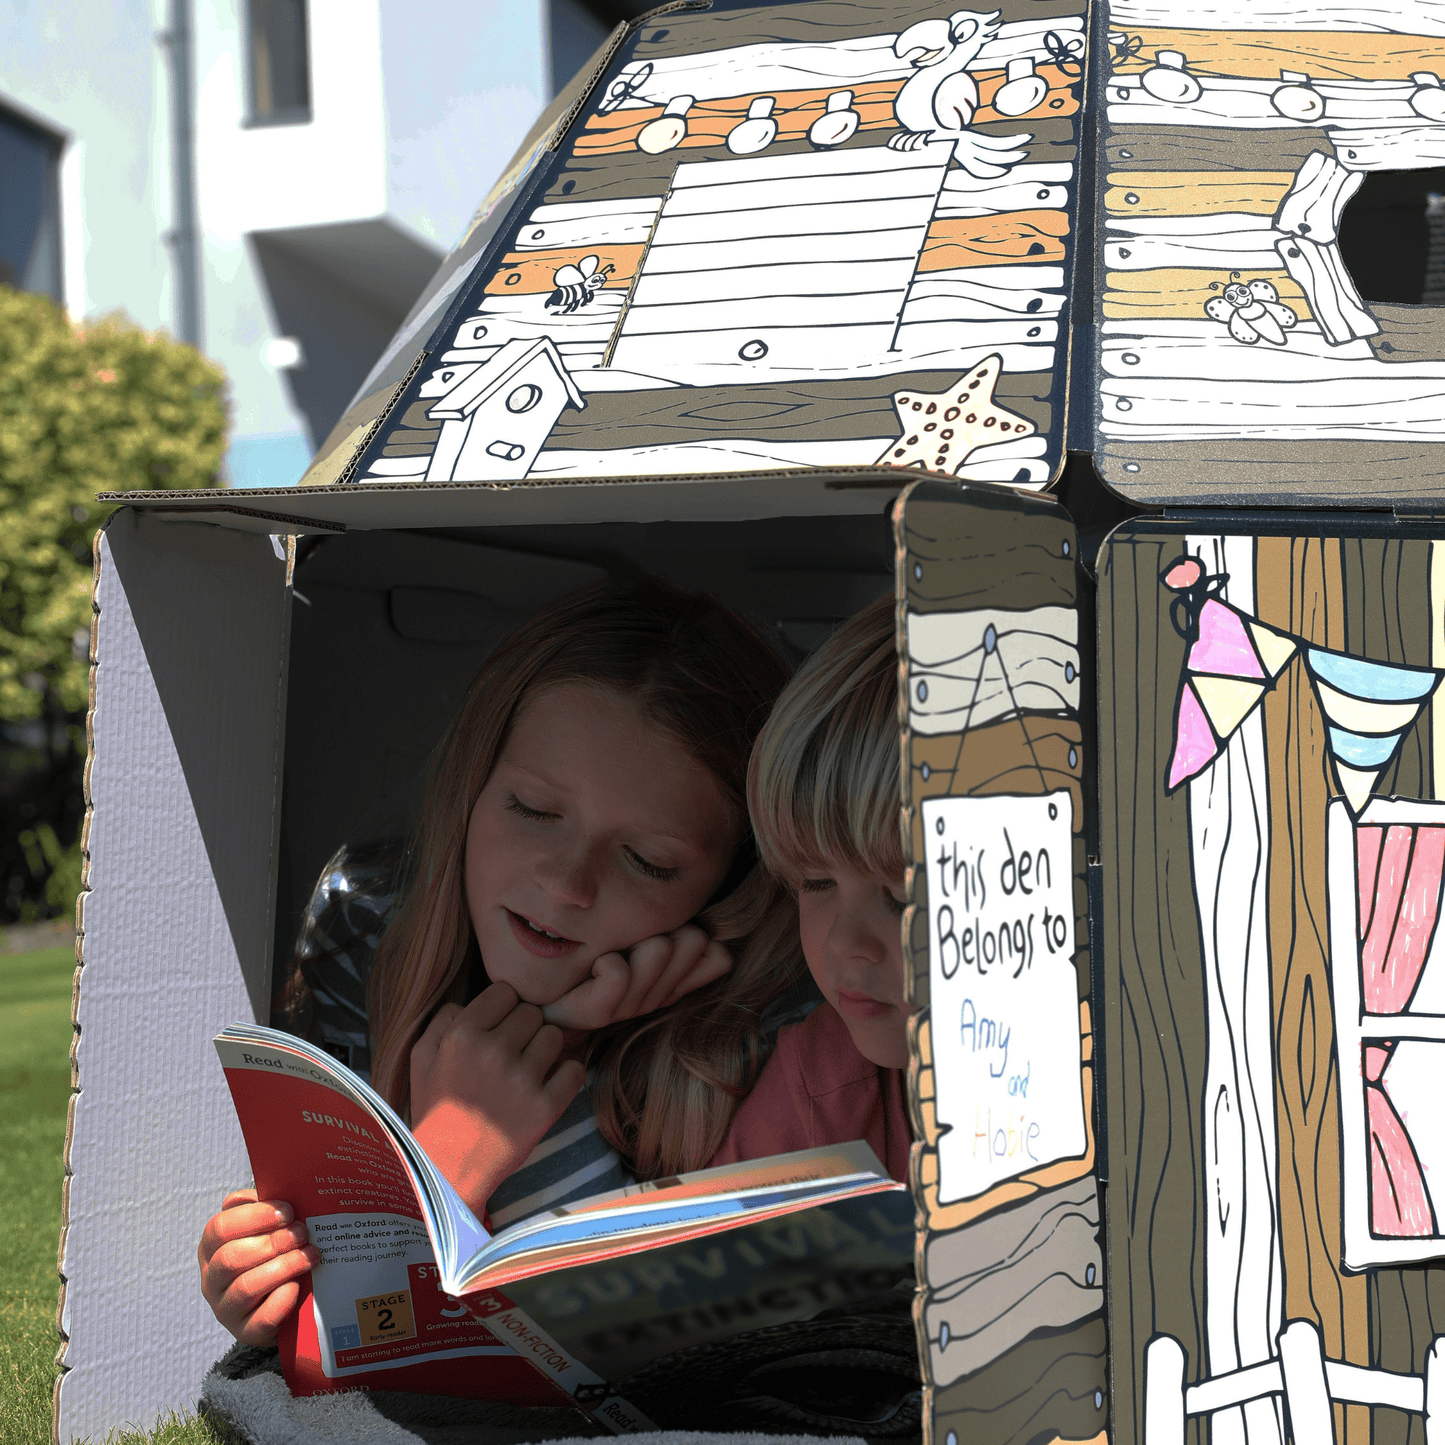 Play Den - Children's Cardboard Playhouse And Periscope